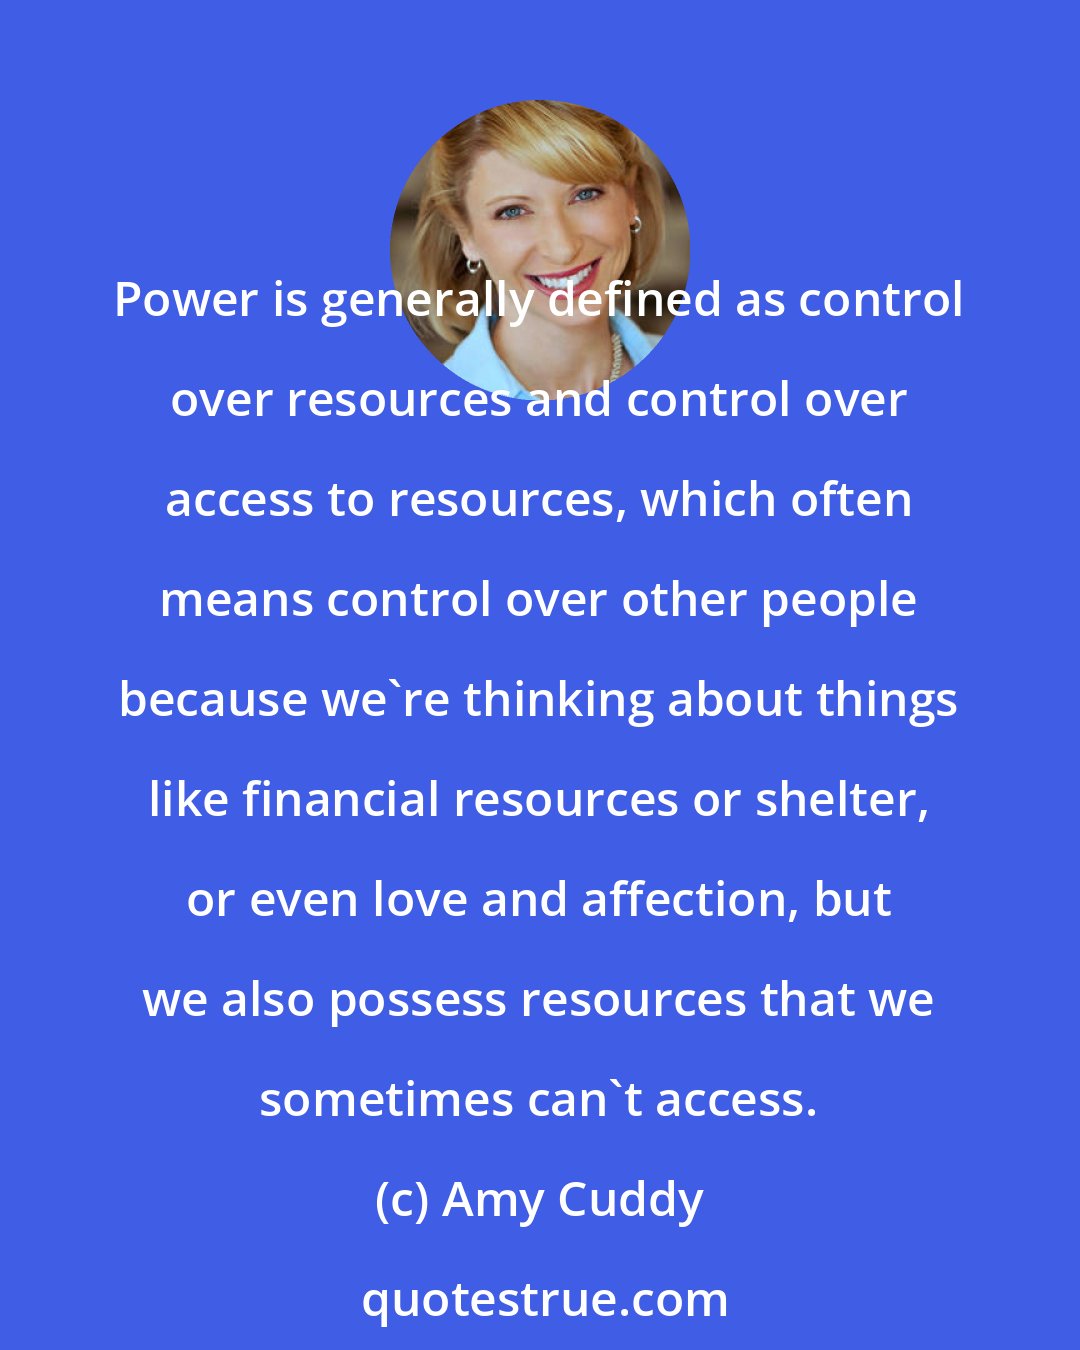 Amy Cuddy: Power is generally defined as control over resources and control over access to resources, which often means control over other people because we're thinking about things like financial resources or shelter, or even love and affection, but we also possess resources that we sometimes can't access.